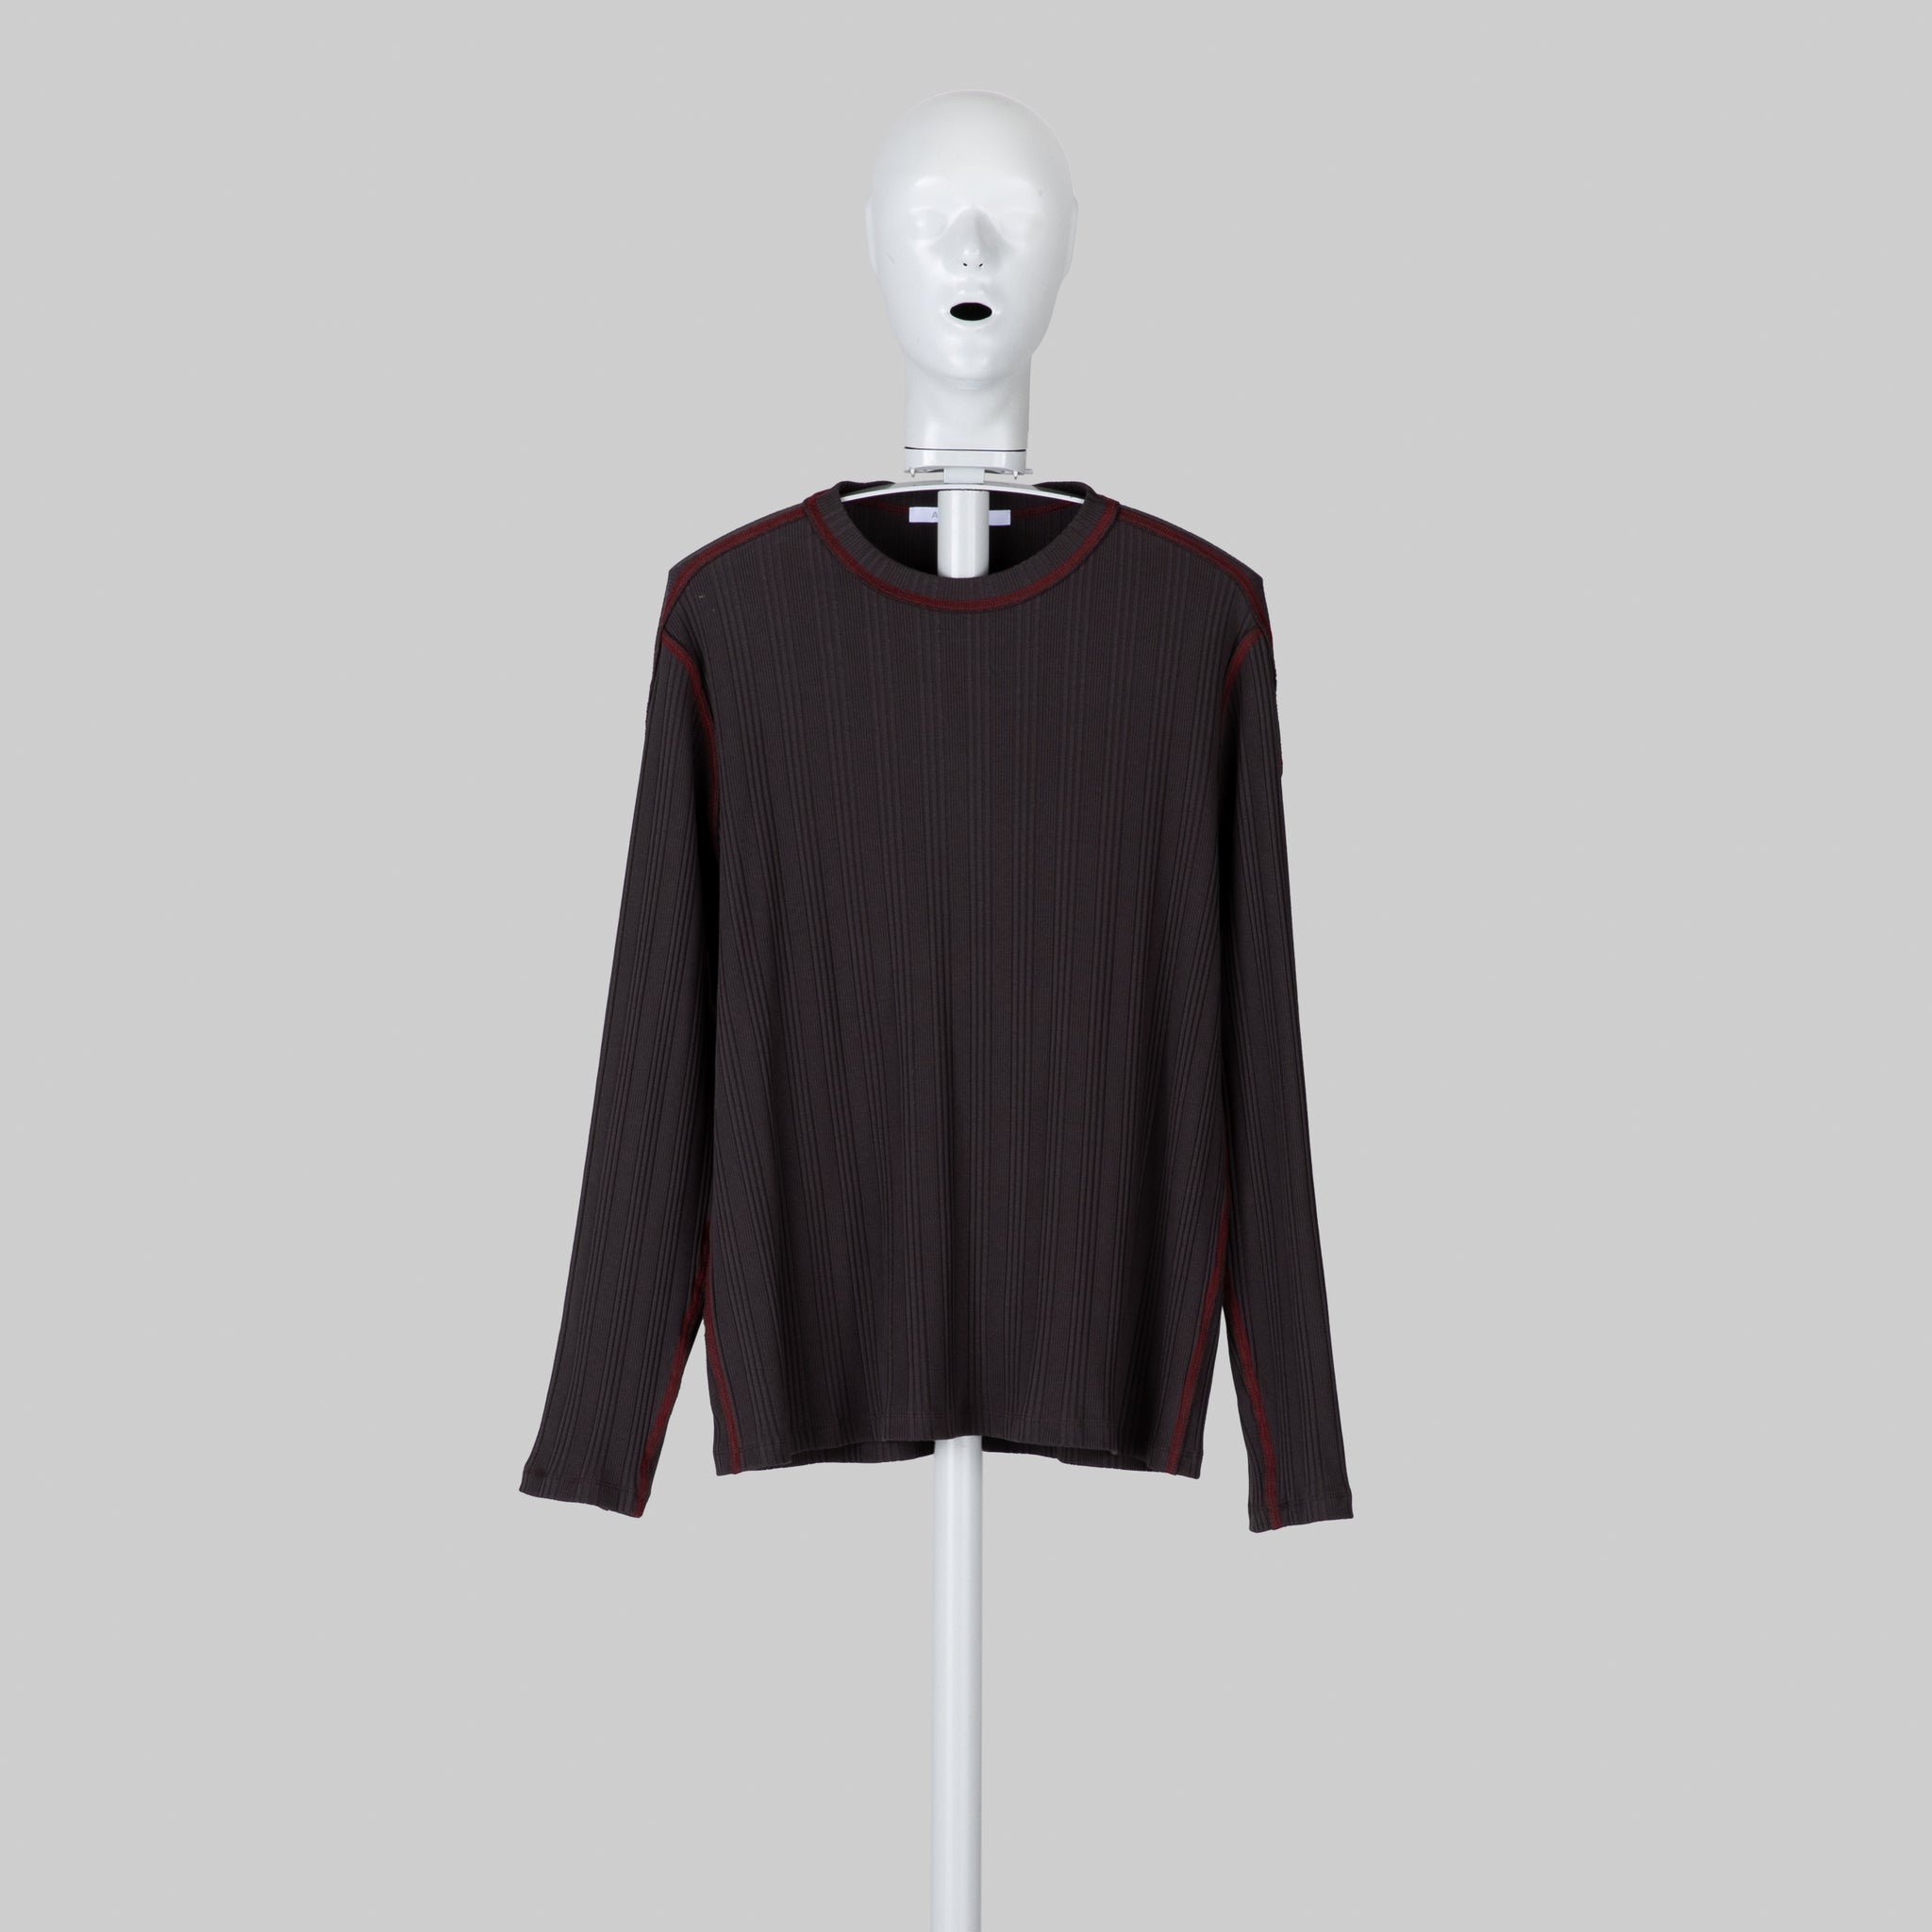 AFFXWRKS BOXED PULLOVER RIB SHALE BROWN